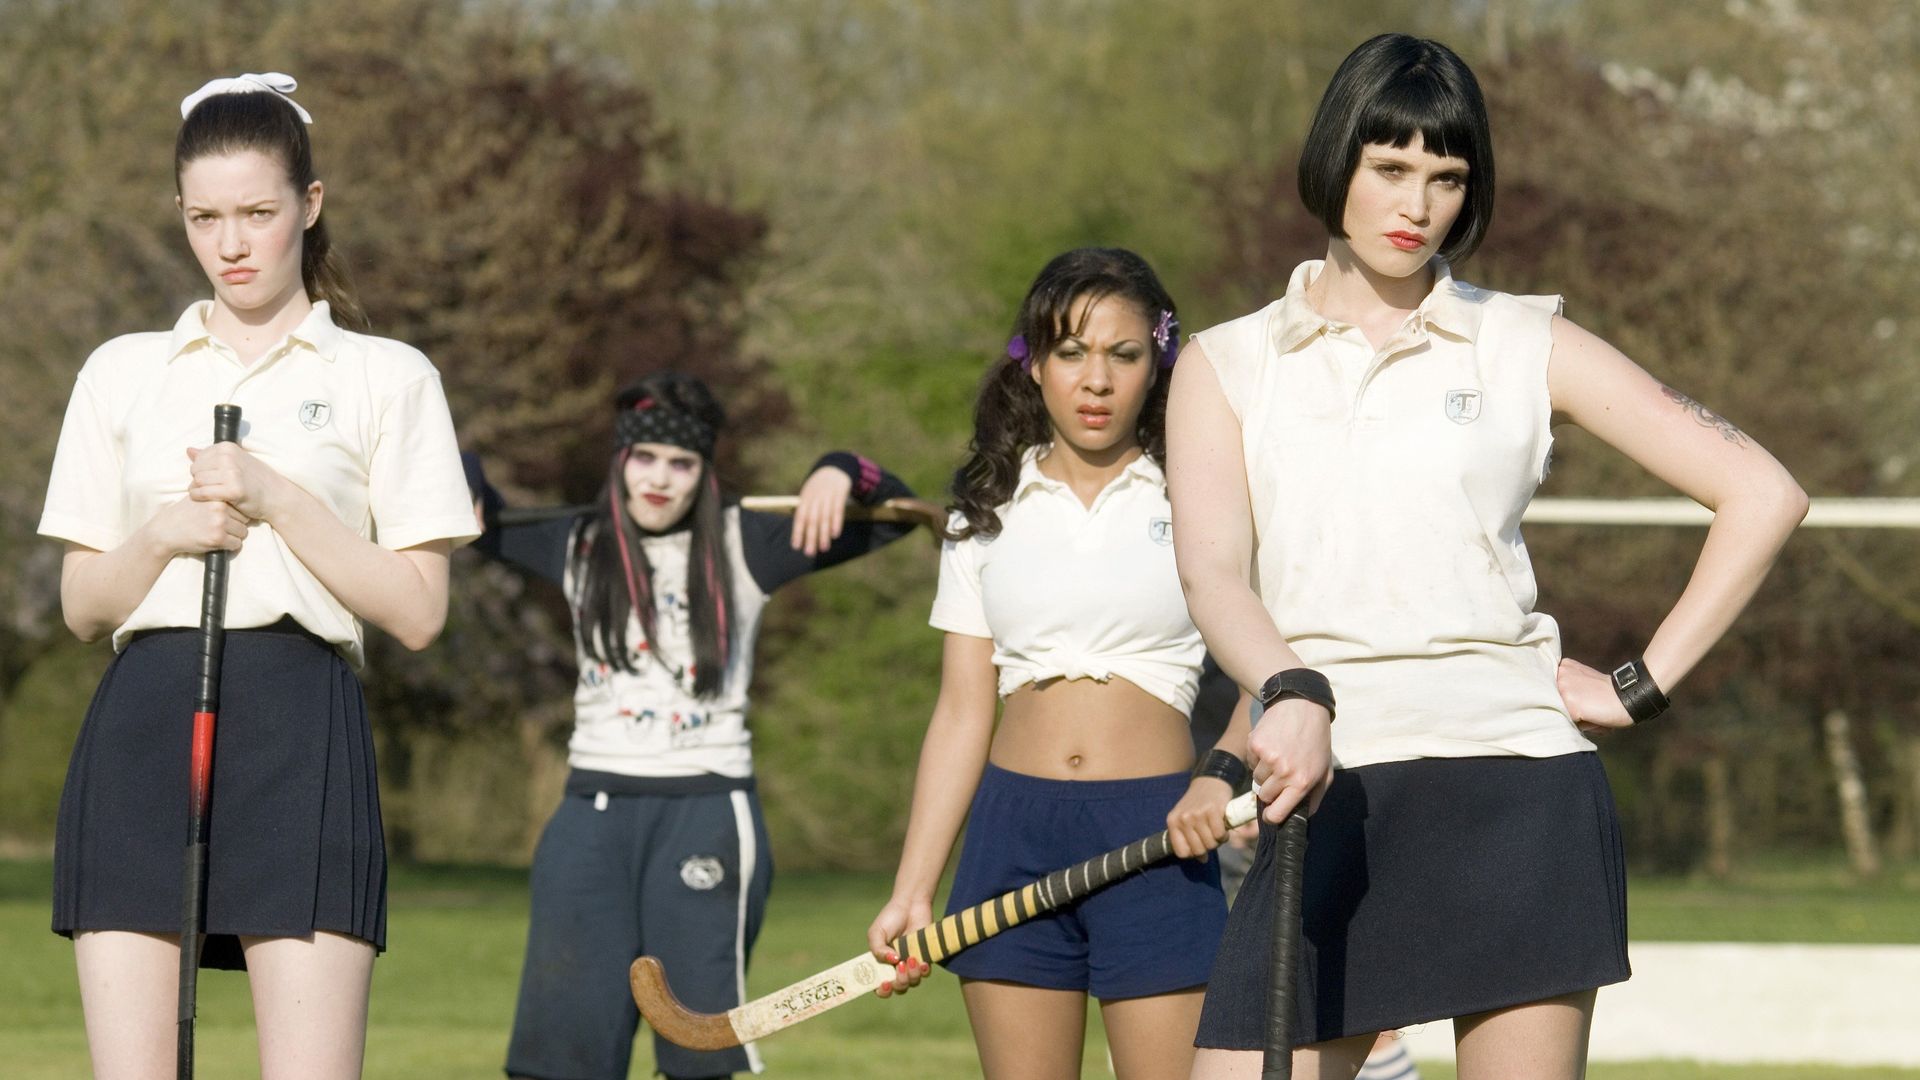 St Trinian's 2: The Legend of Fritton's Gold Backdrop